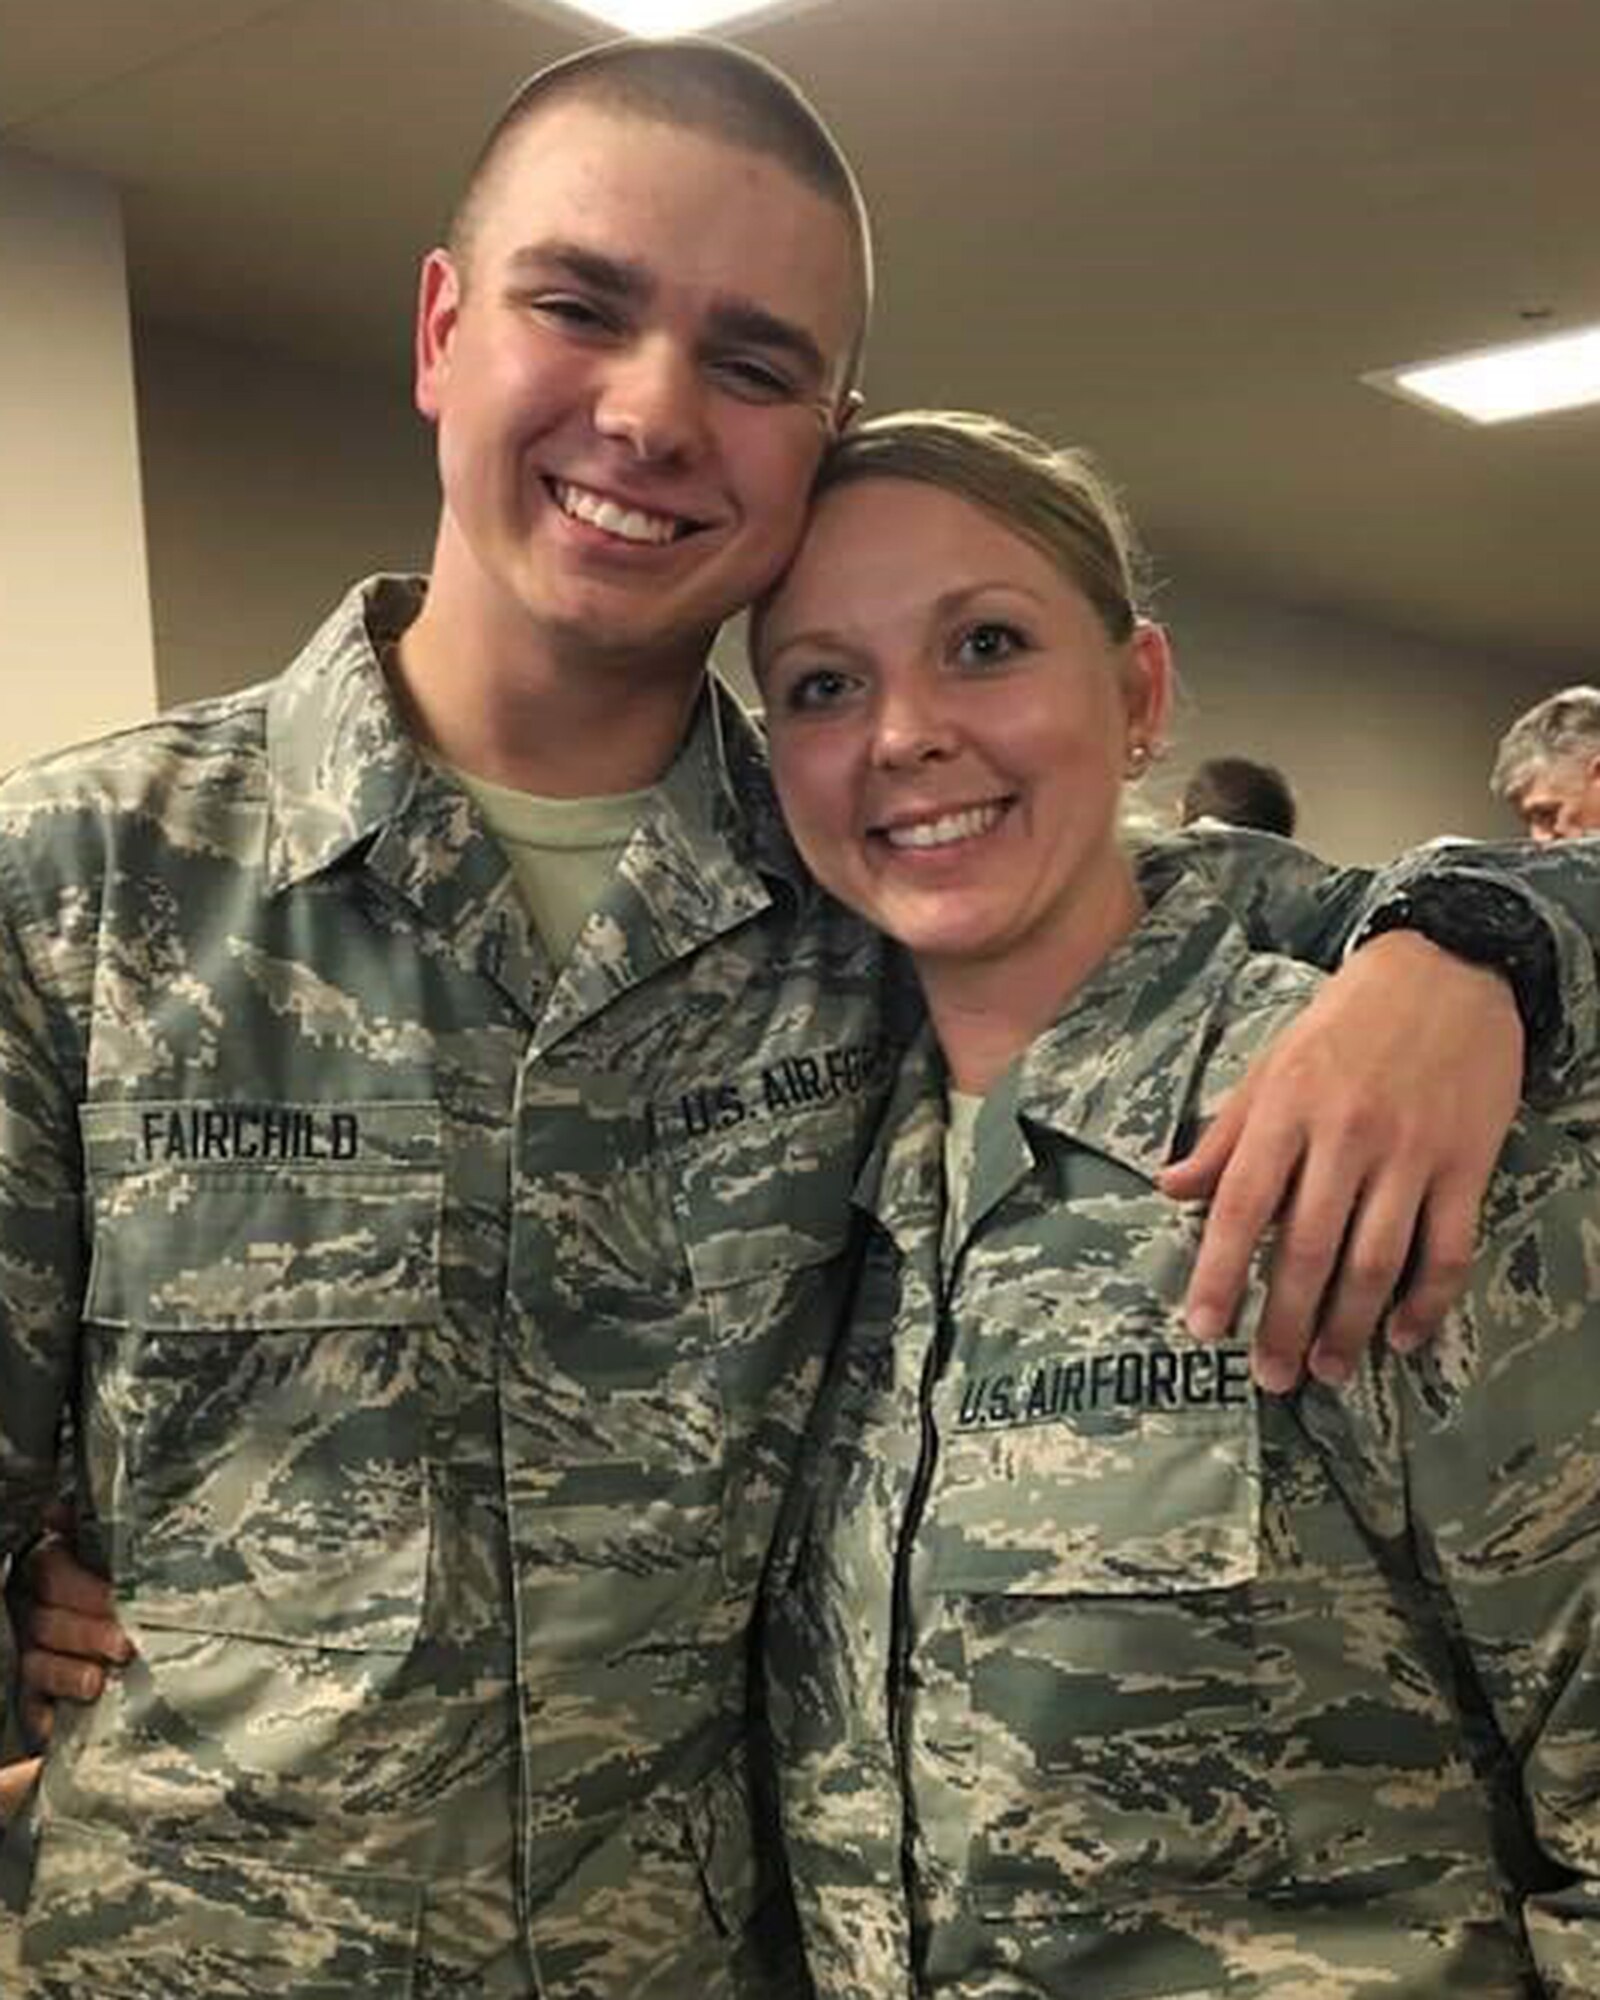 Senior Airman Amanda Guzman, personnel systems management assistant, 445th Force Support Squadron and her son, Senior Airman Stanley Fairchild III, 89th Airlift Squadron loadmaster, pose for a photo at the 445th Airlift Wing. The mother and son attended Basic Military Training at Lackland Air Force Base, Texas and graduated Oct. 25, 2019.